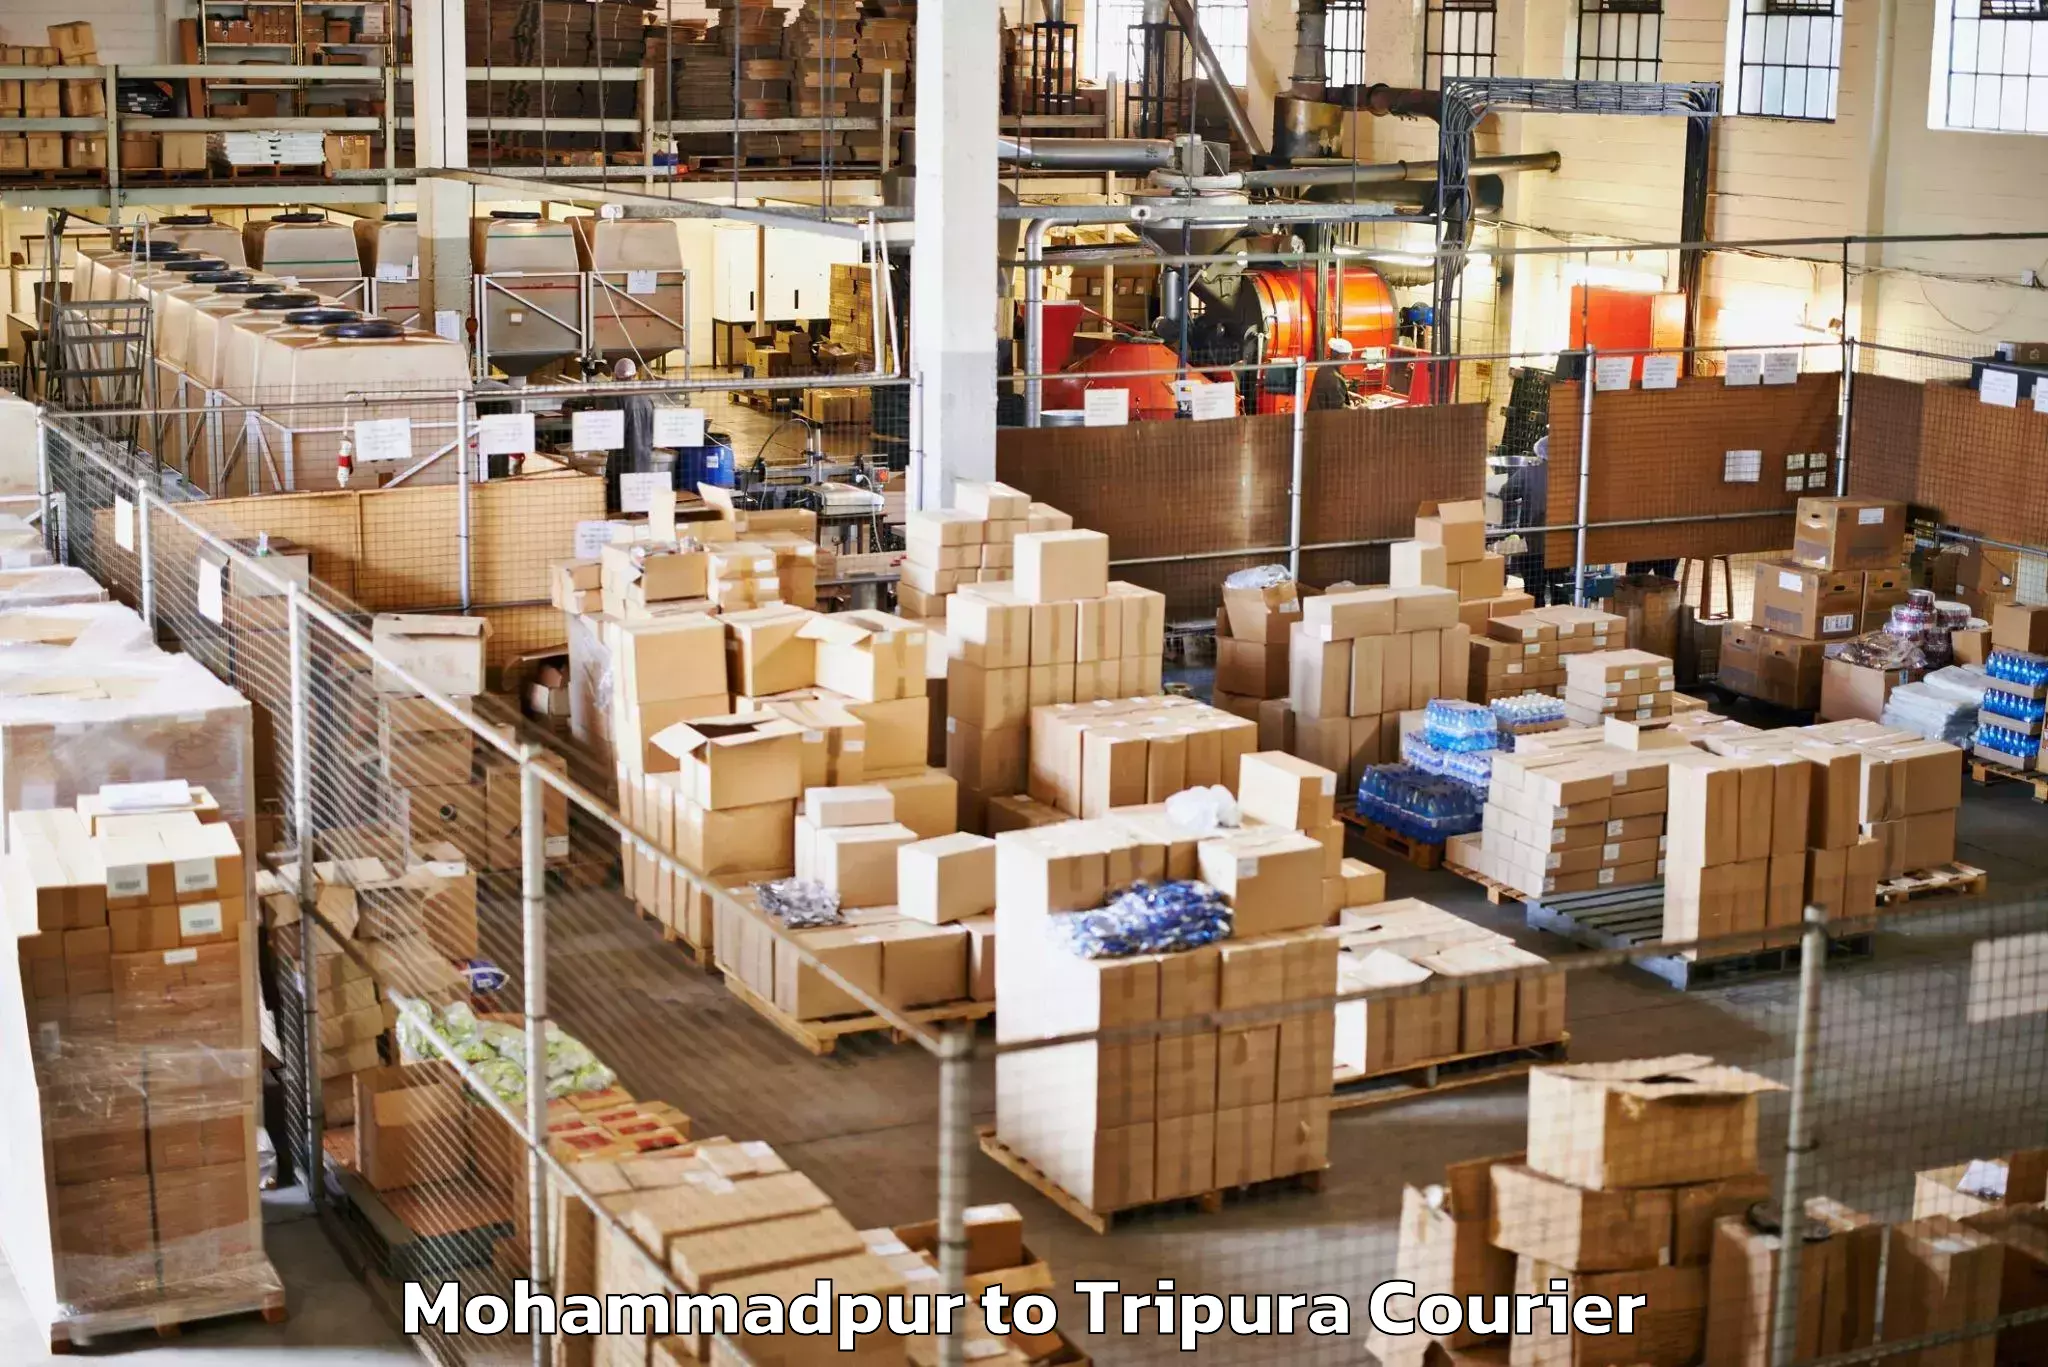 Luggage shipment specialists Mohammadpur to Aambasa